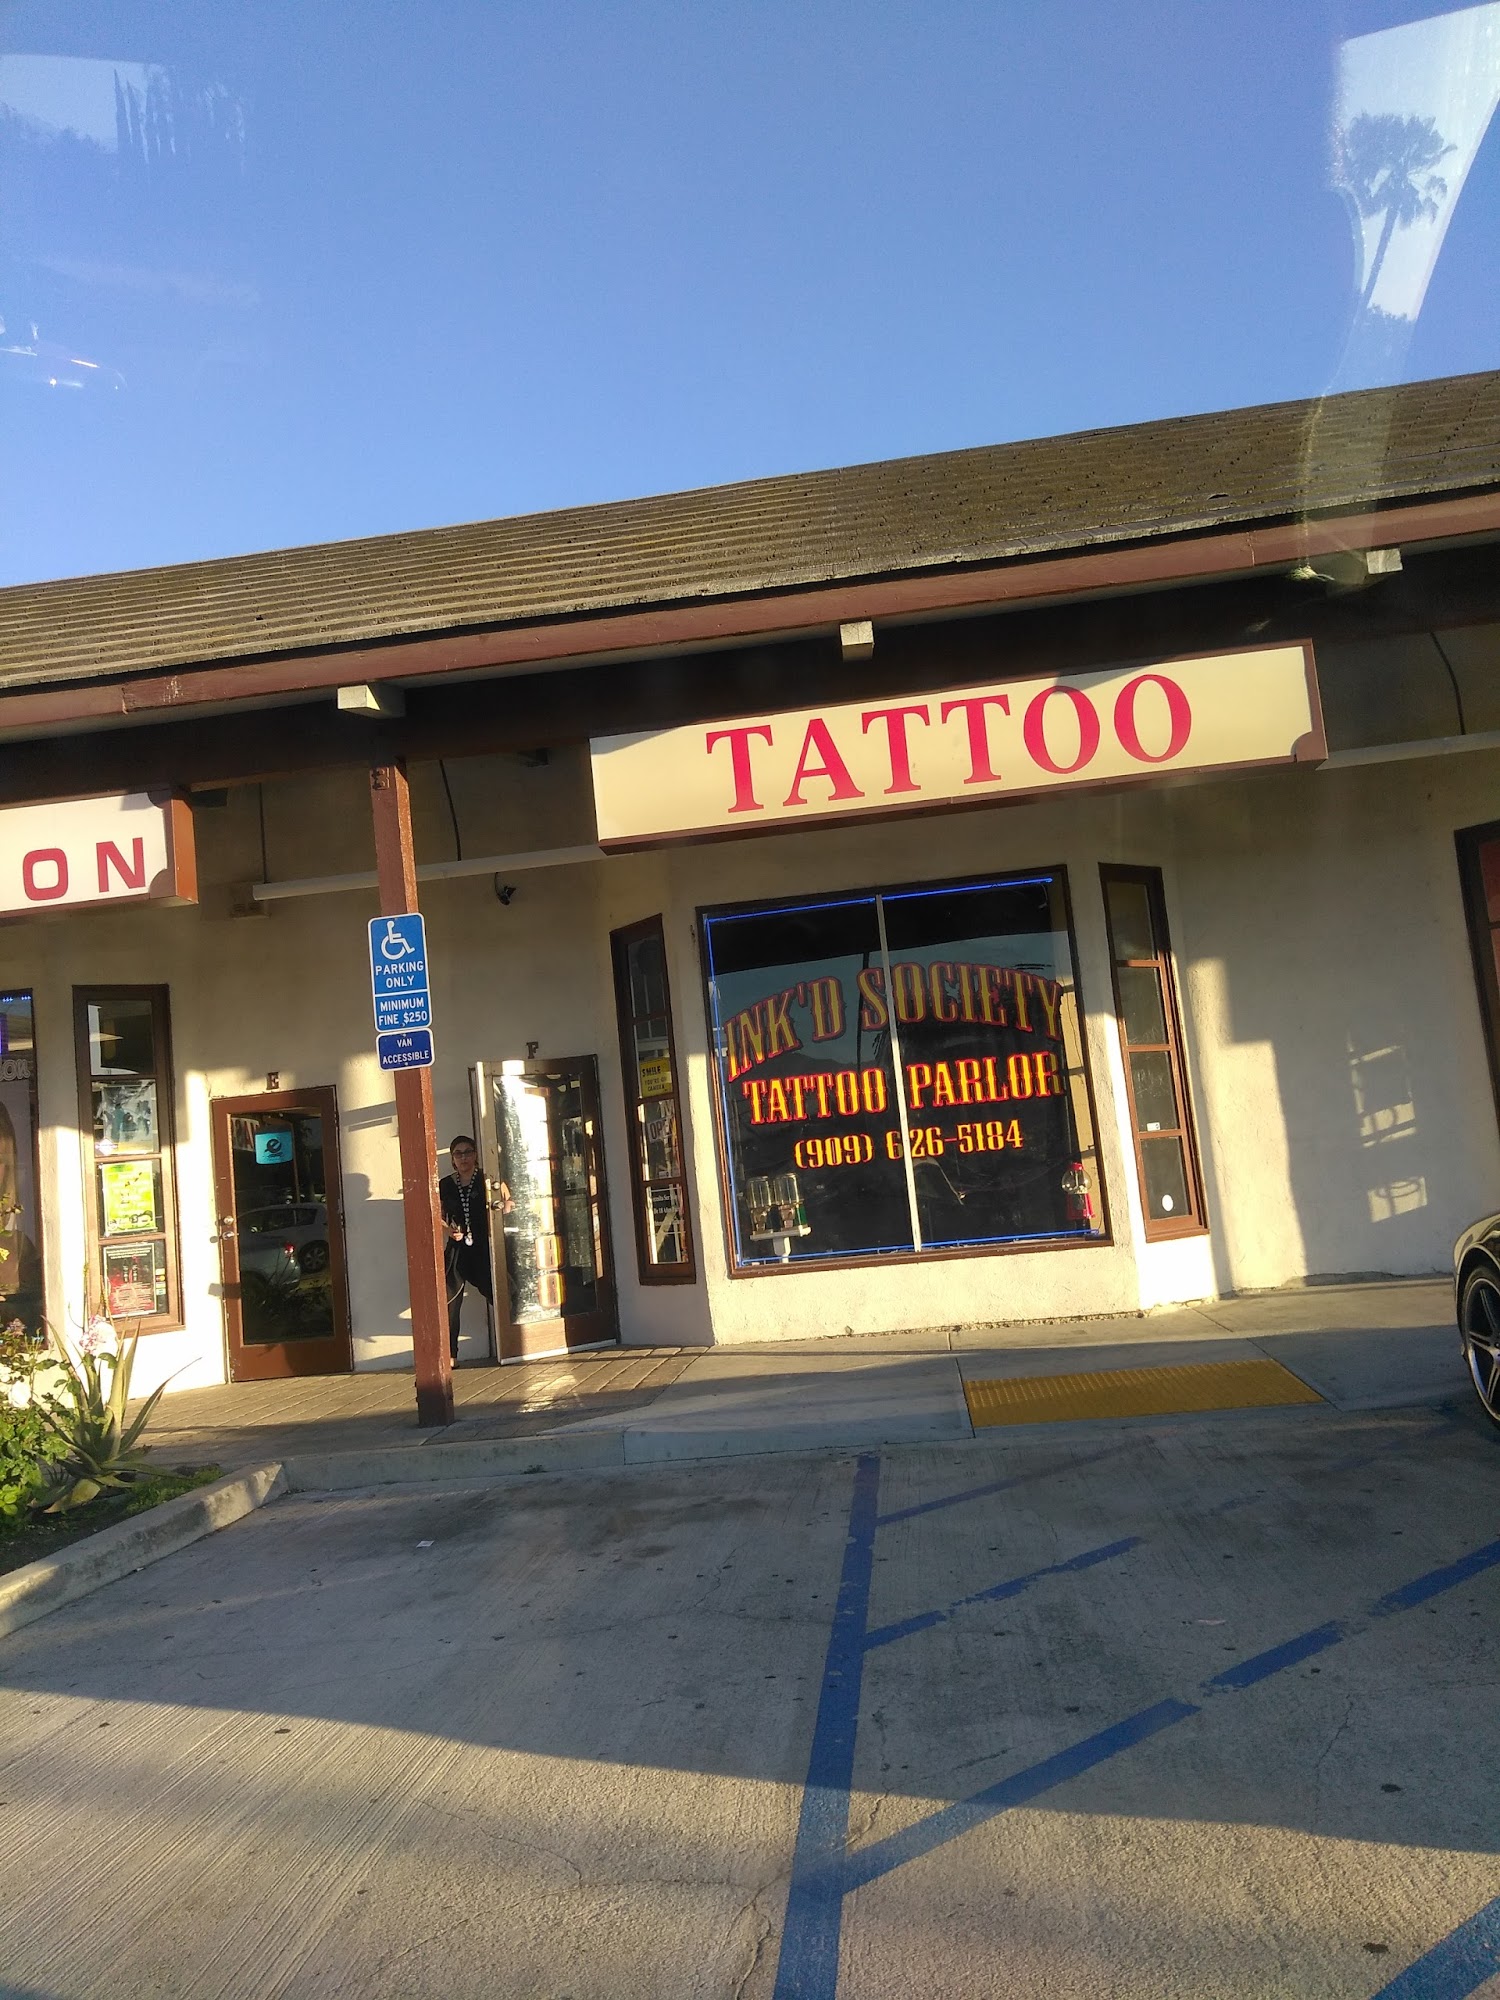 Ink'd Society Tattoo Parlor